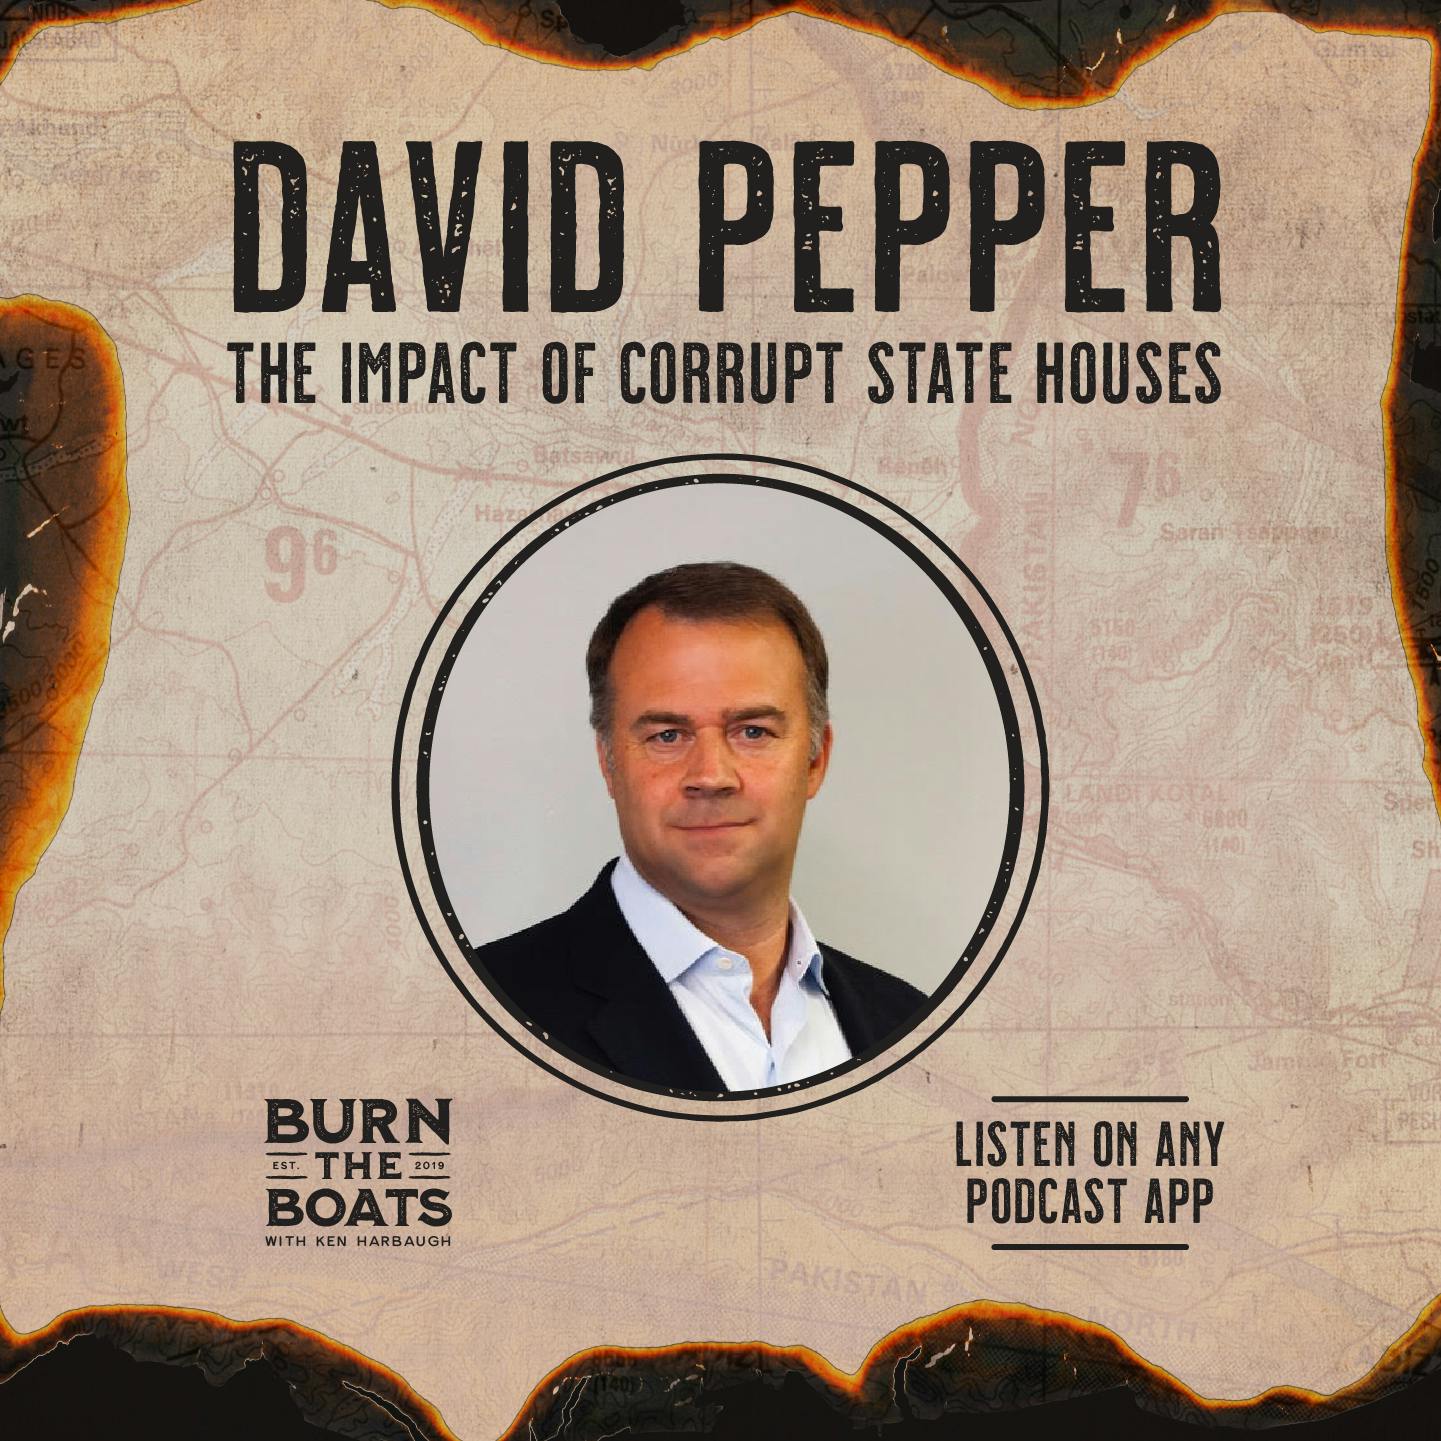 David Pepper: The Impact of Corrupt State Houses